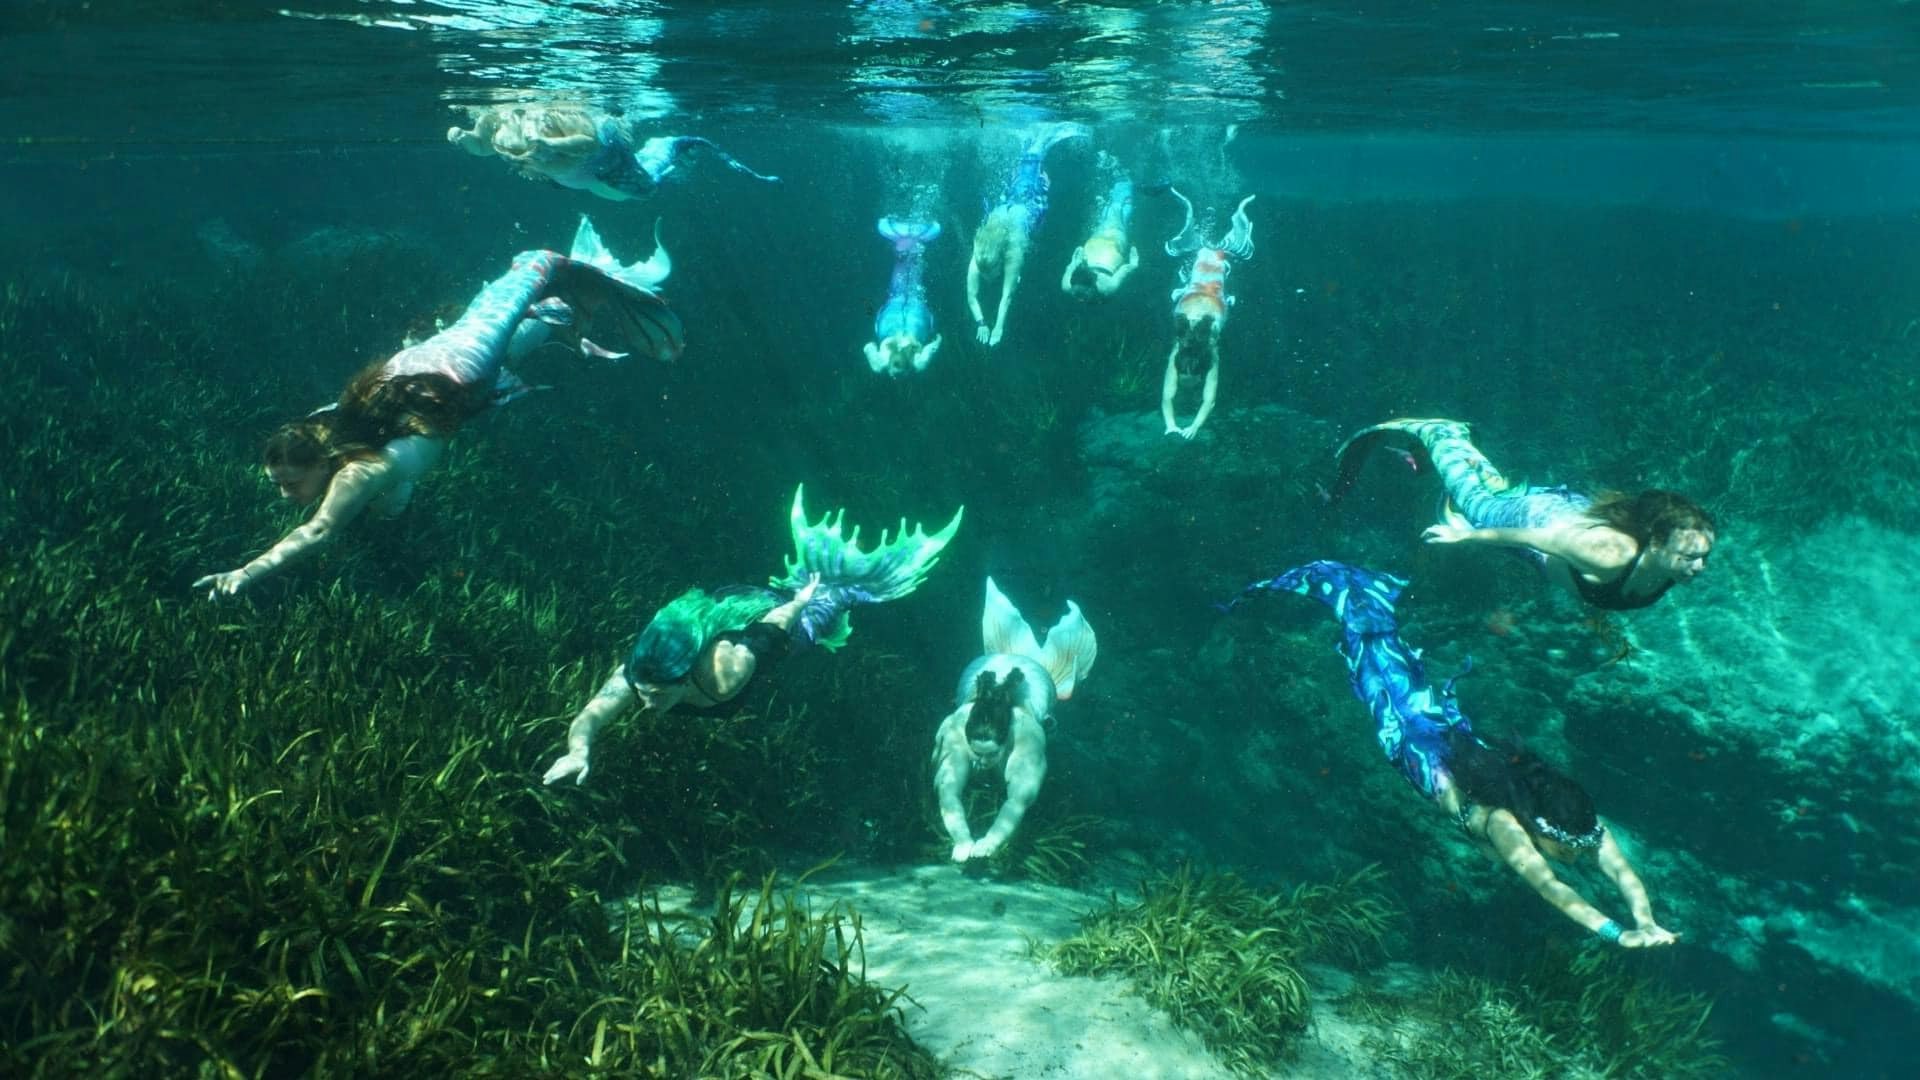 10 mermaids dive into the waters of a Florida spring and swim towards the camera